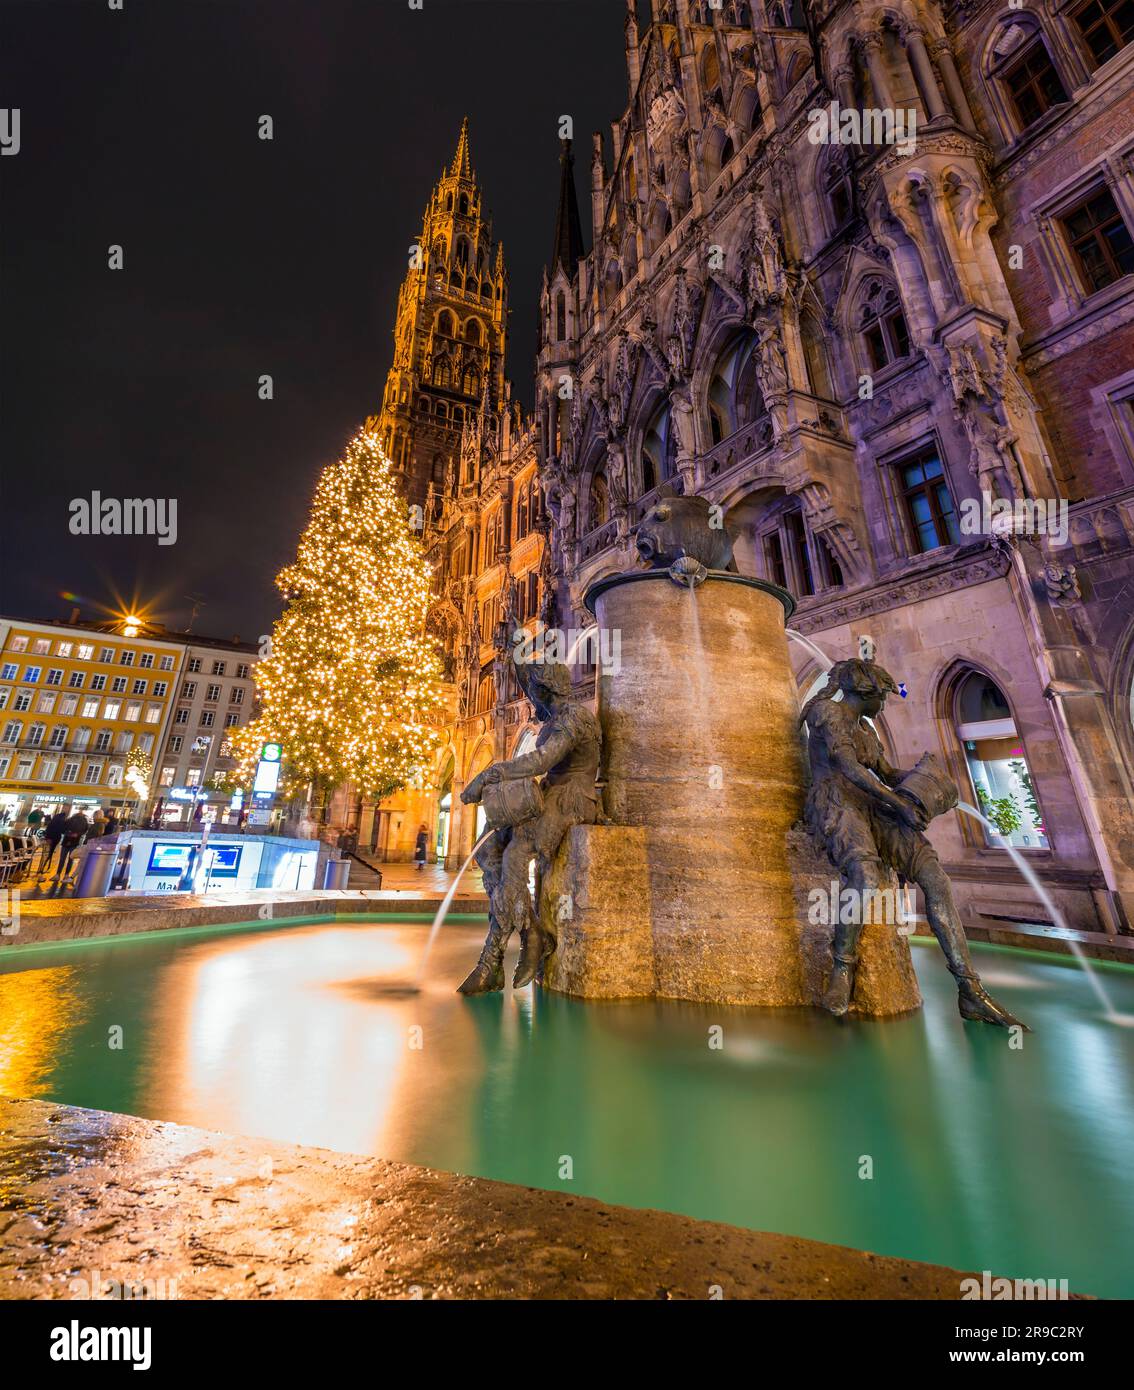 Munich, Germany - December 23, 2021: Fischbrunnen (Fish Fountain) and the Neue Rathaus of Munich (New Town Hall) in Marienplatz, the town square in hi Stock Photo